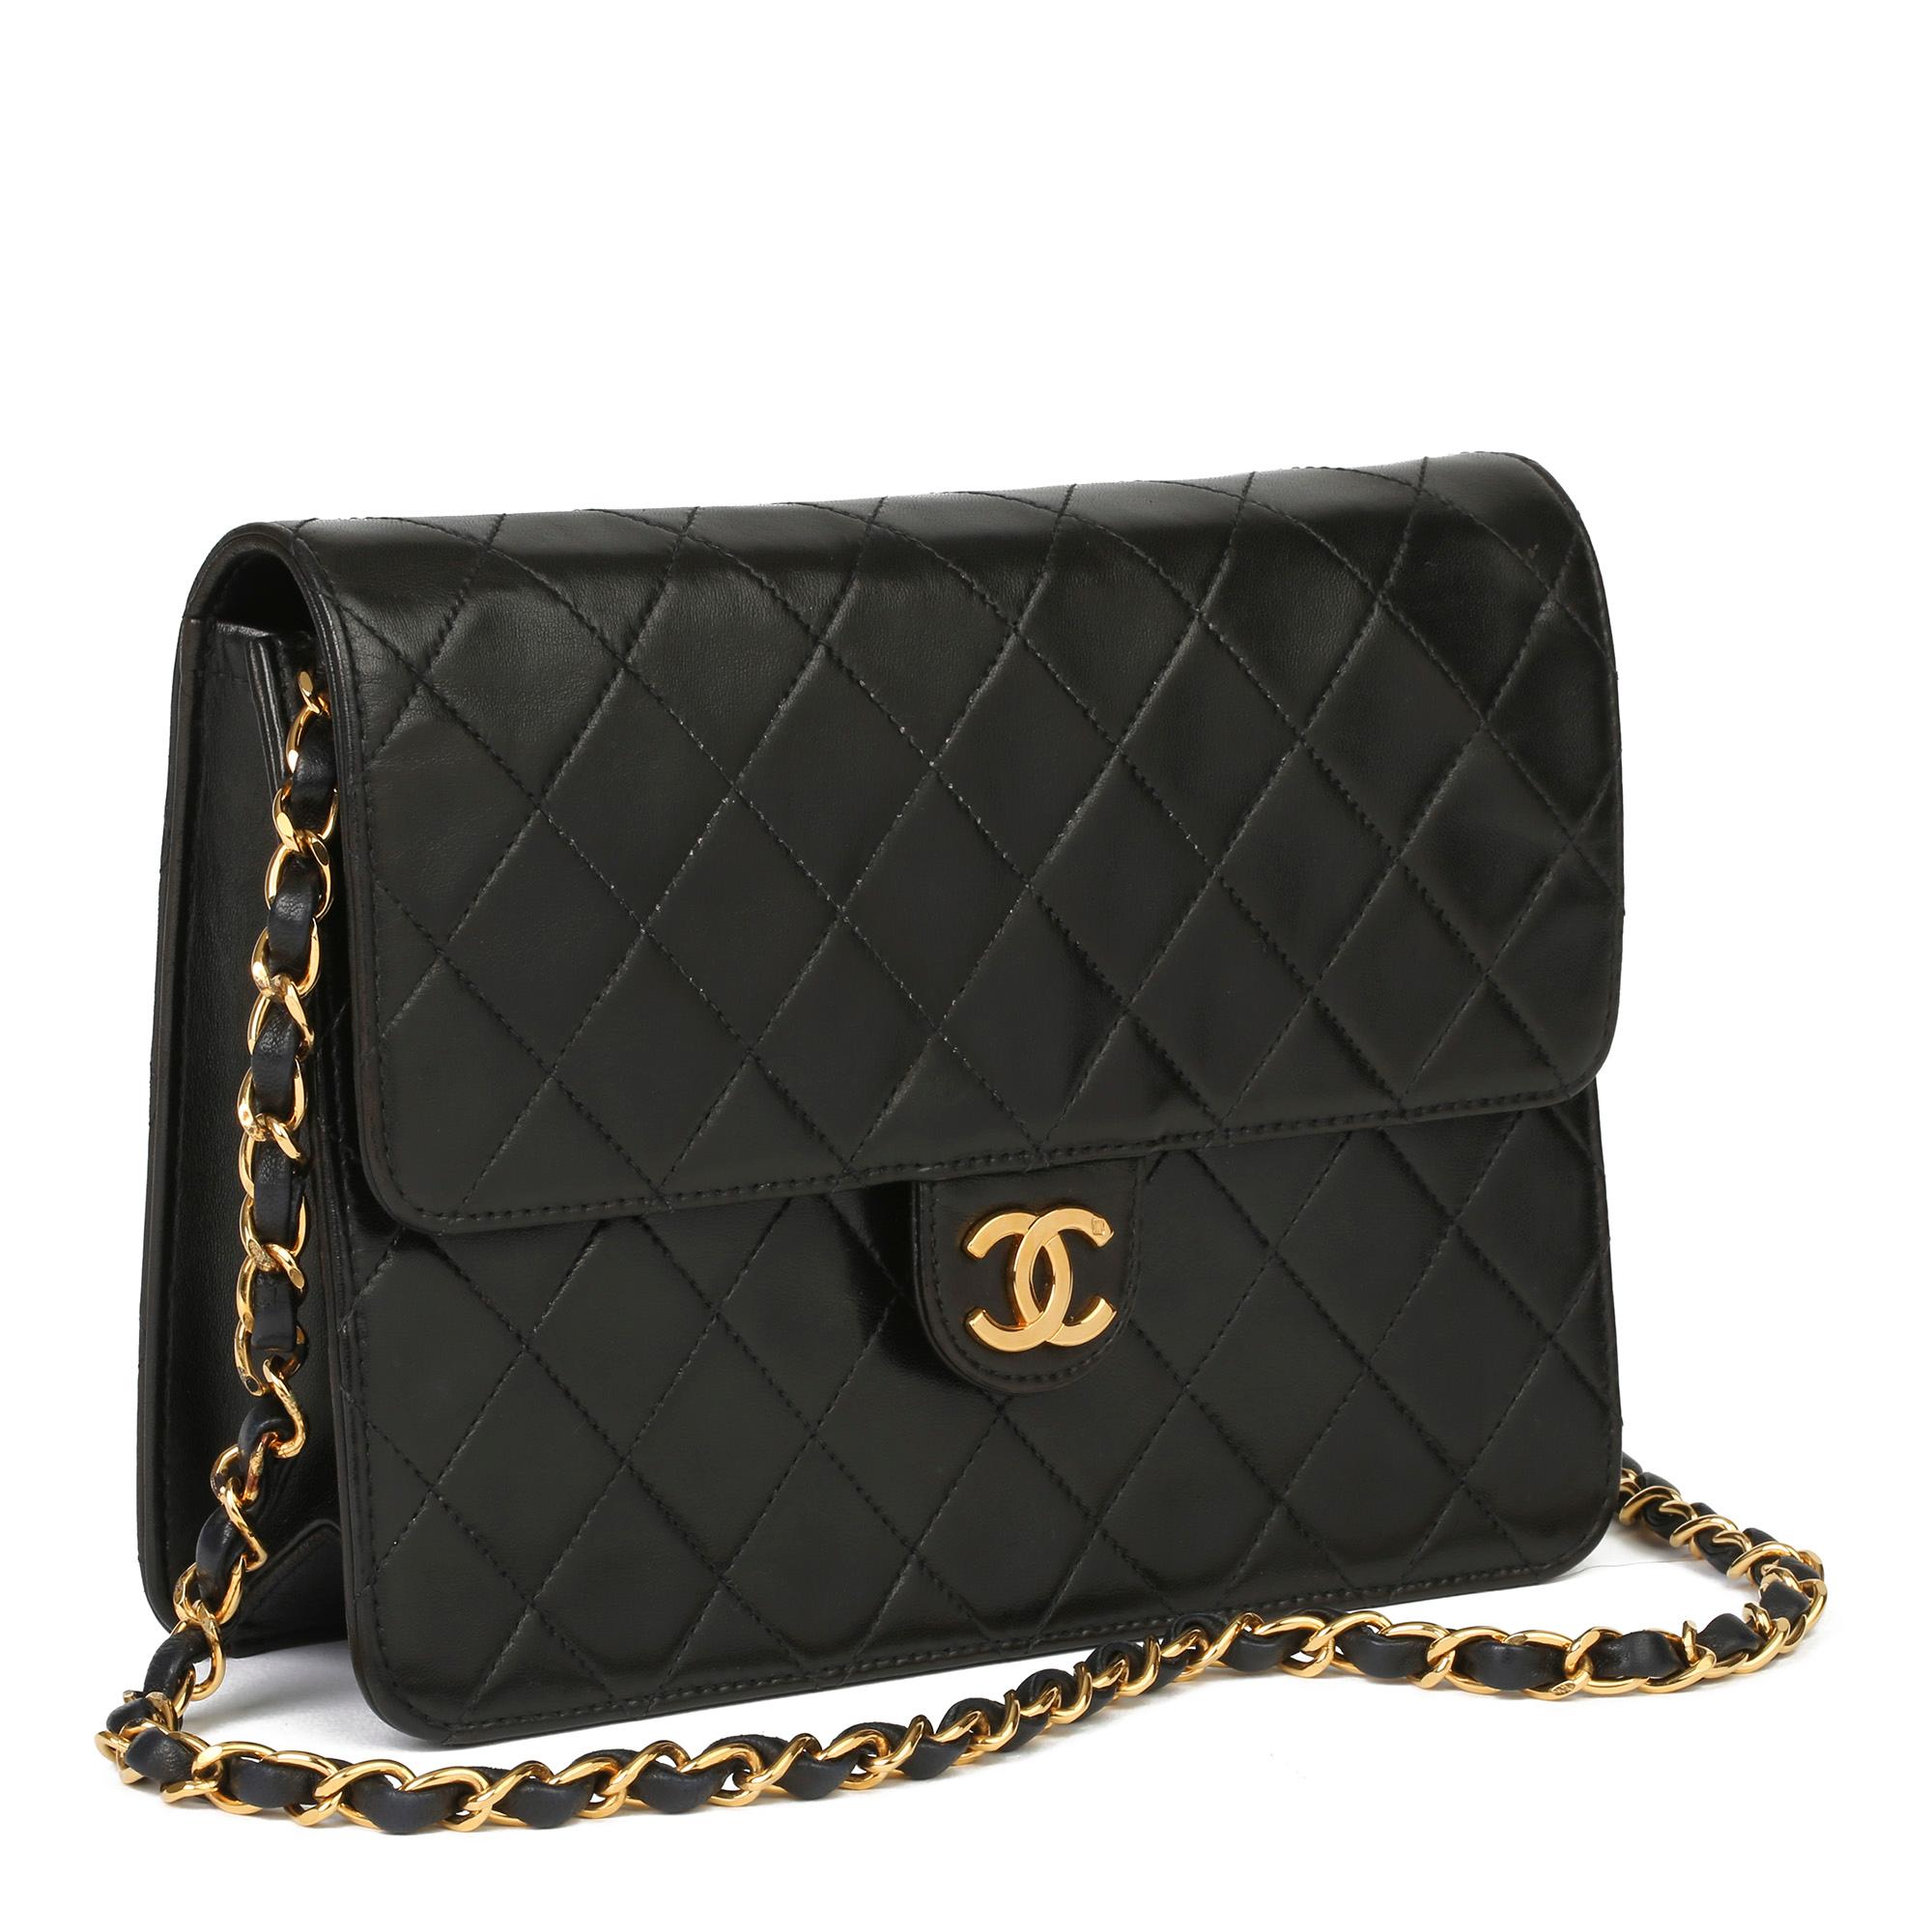 CHANEL
Black Quilted Lambskin Vintage Small Classic Single Flap Bag

Xupes Reference: HB3911
Serial Number: 4961211
Age (Circa): 1996
Accompanied By: Chanel Dust Bag, Box, Authenticity Card
Authenticity Details: Authenticity Card, Serial Sticker